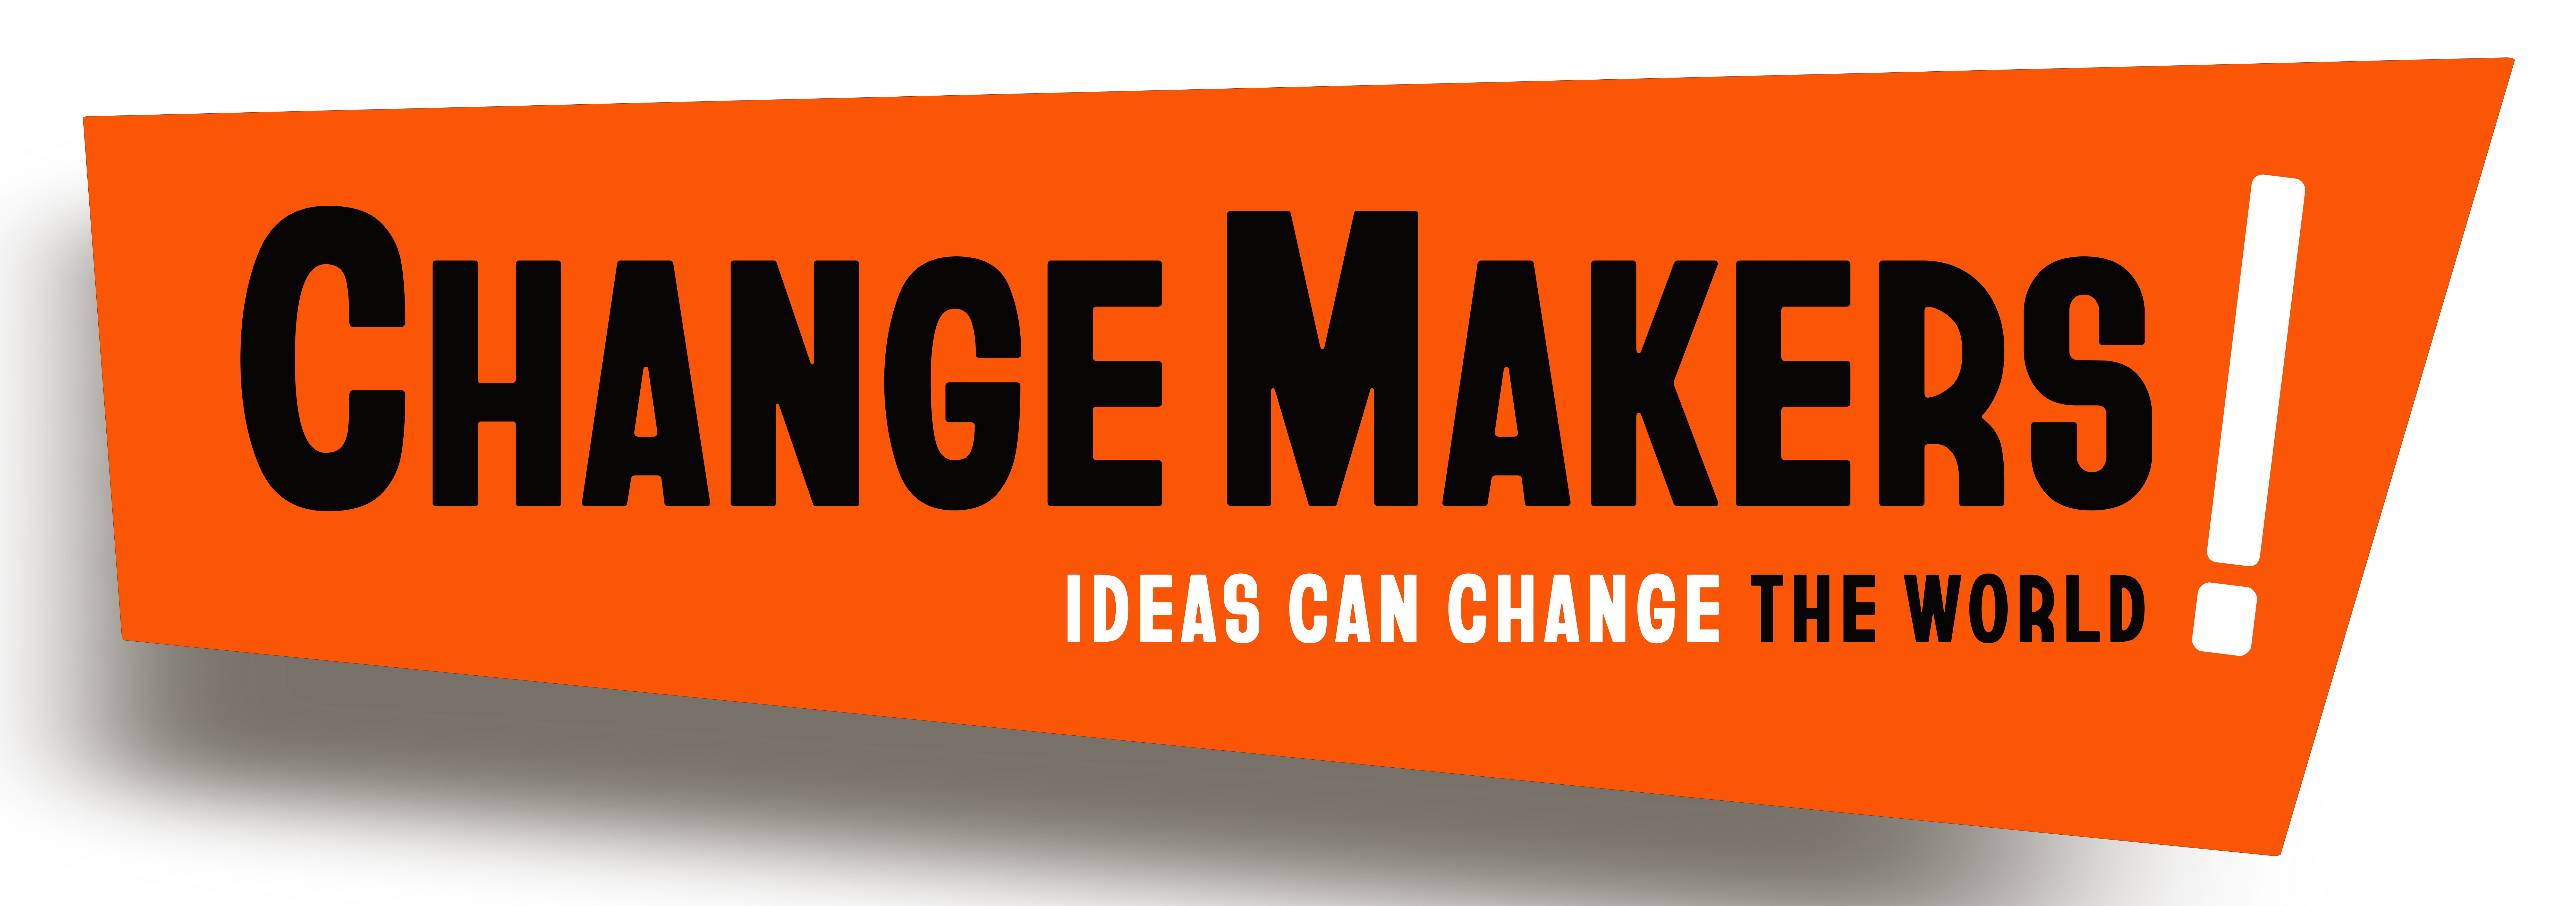 the words "change makers" in black on an orange background